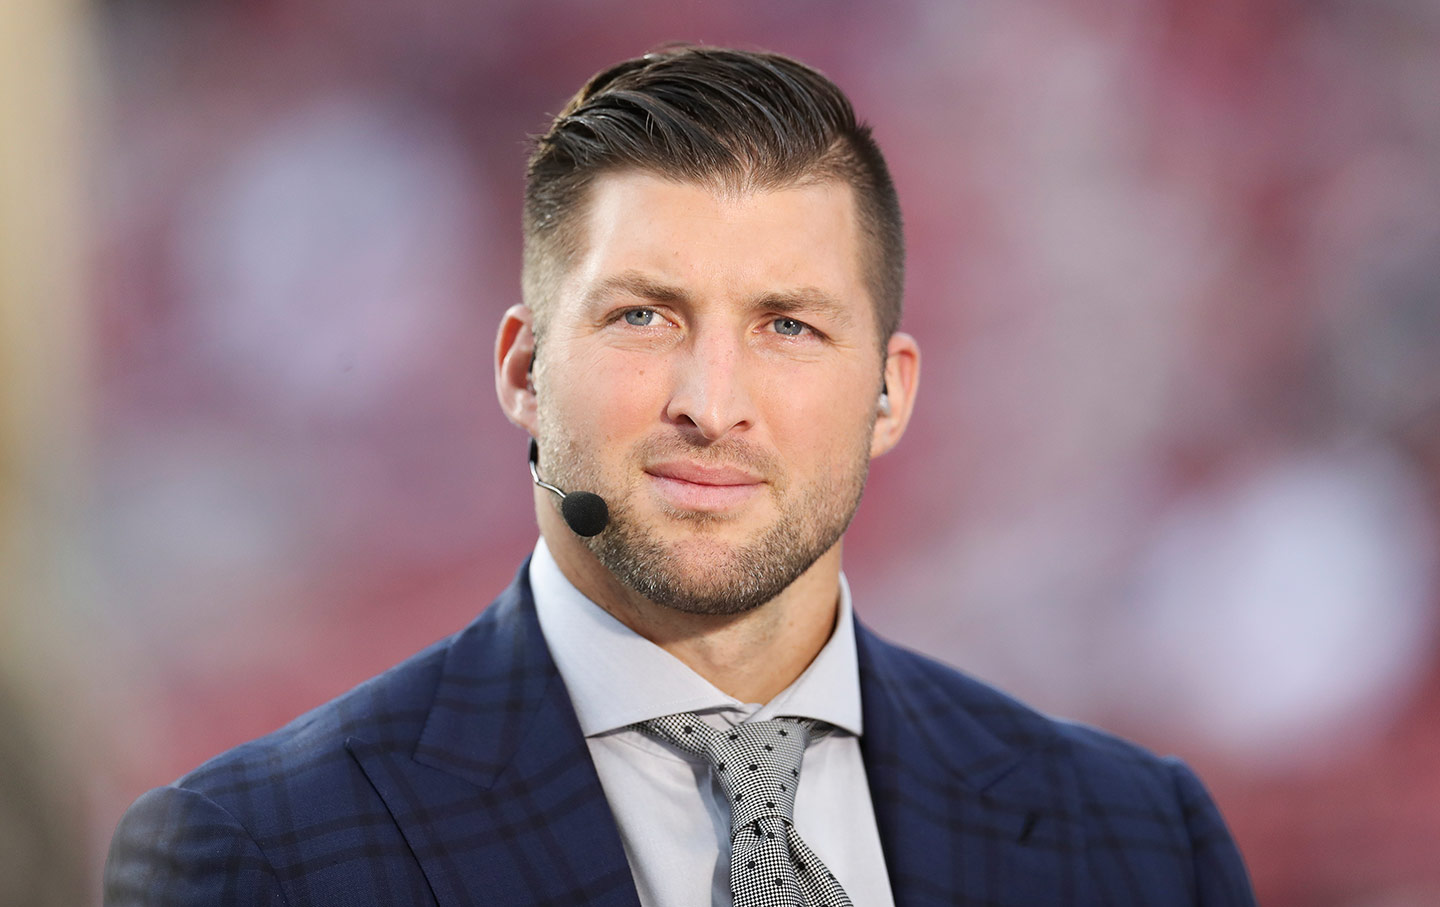 How tall is Tim Tebow?